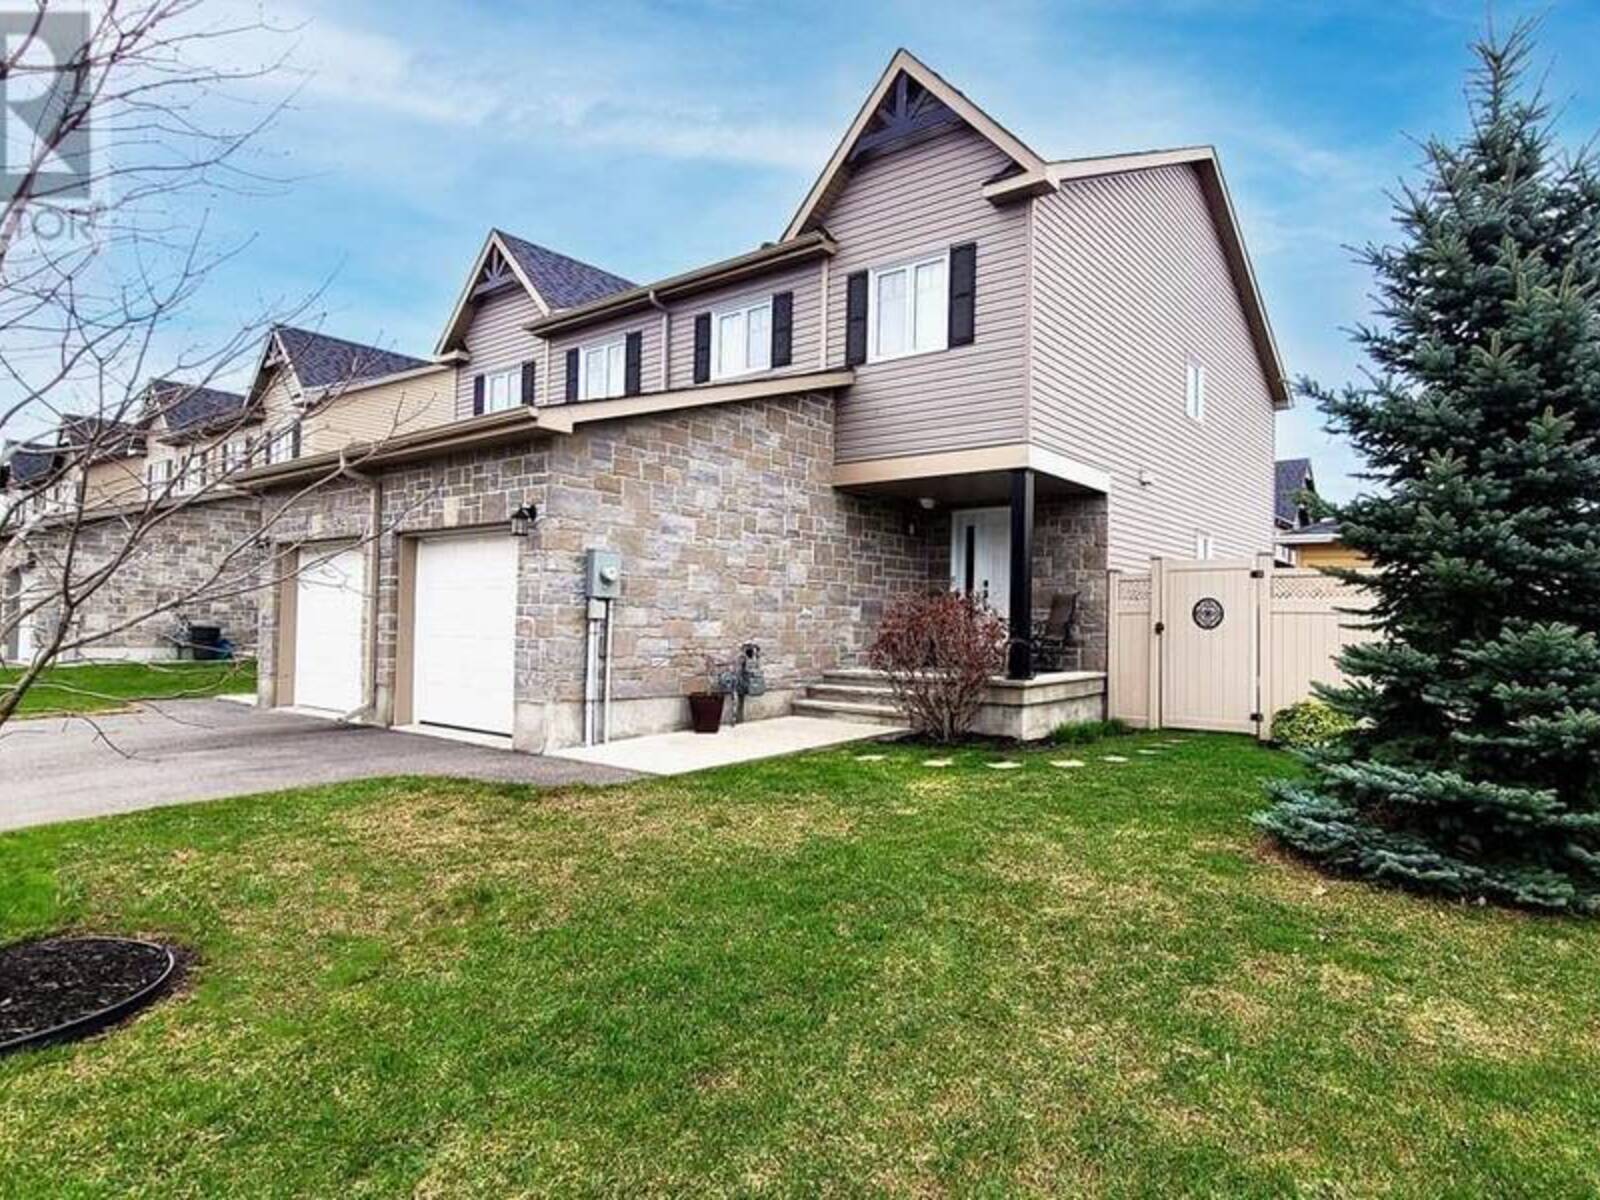 1145 CLEMENT COURT, Cornwall, Ontario K6H 0G3